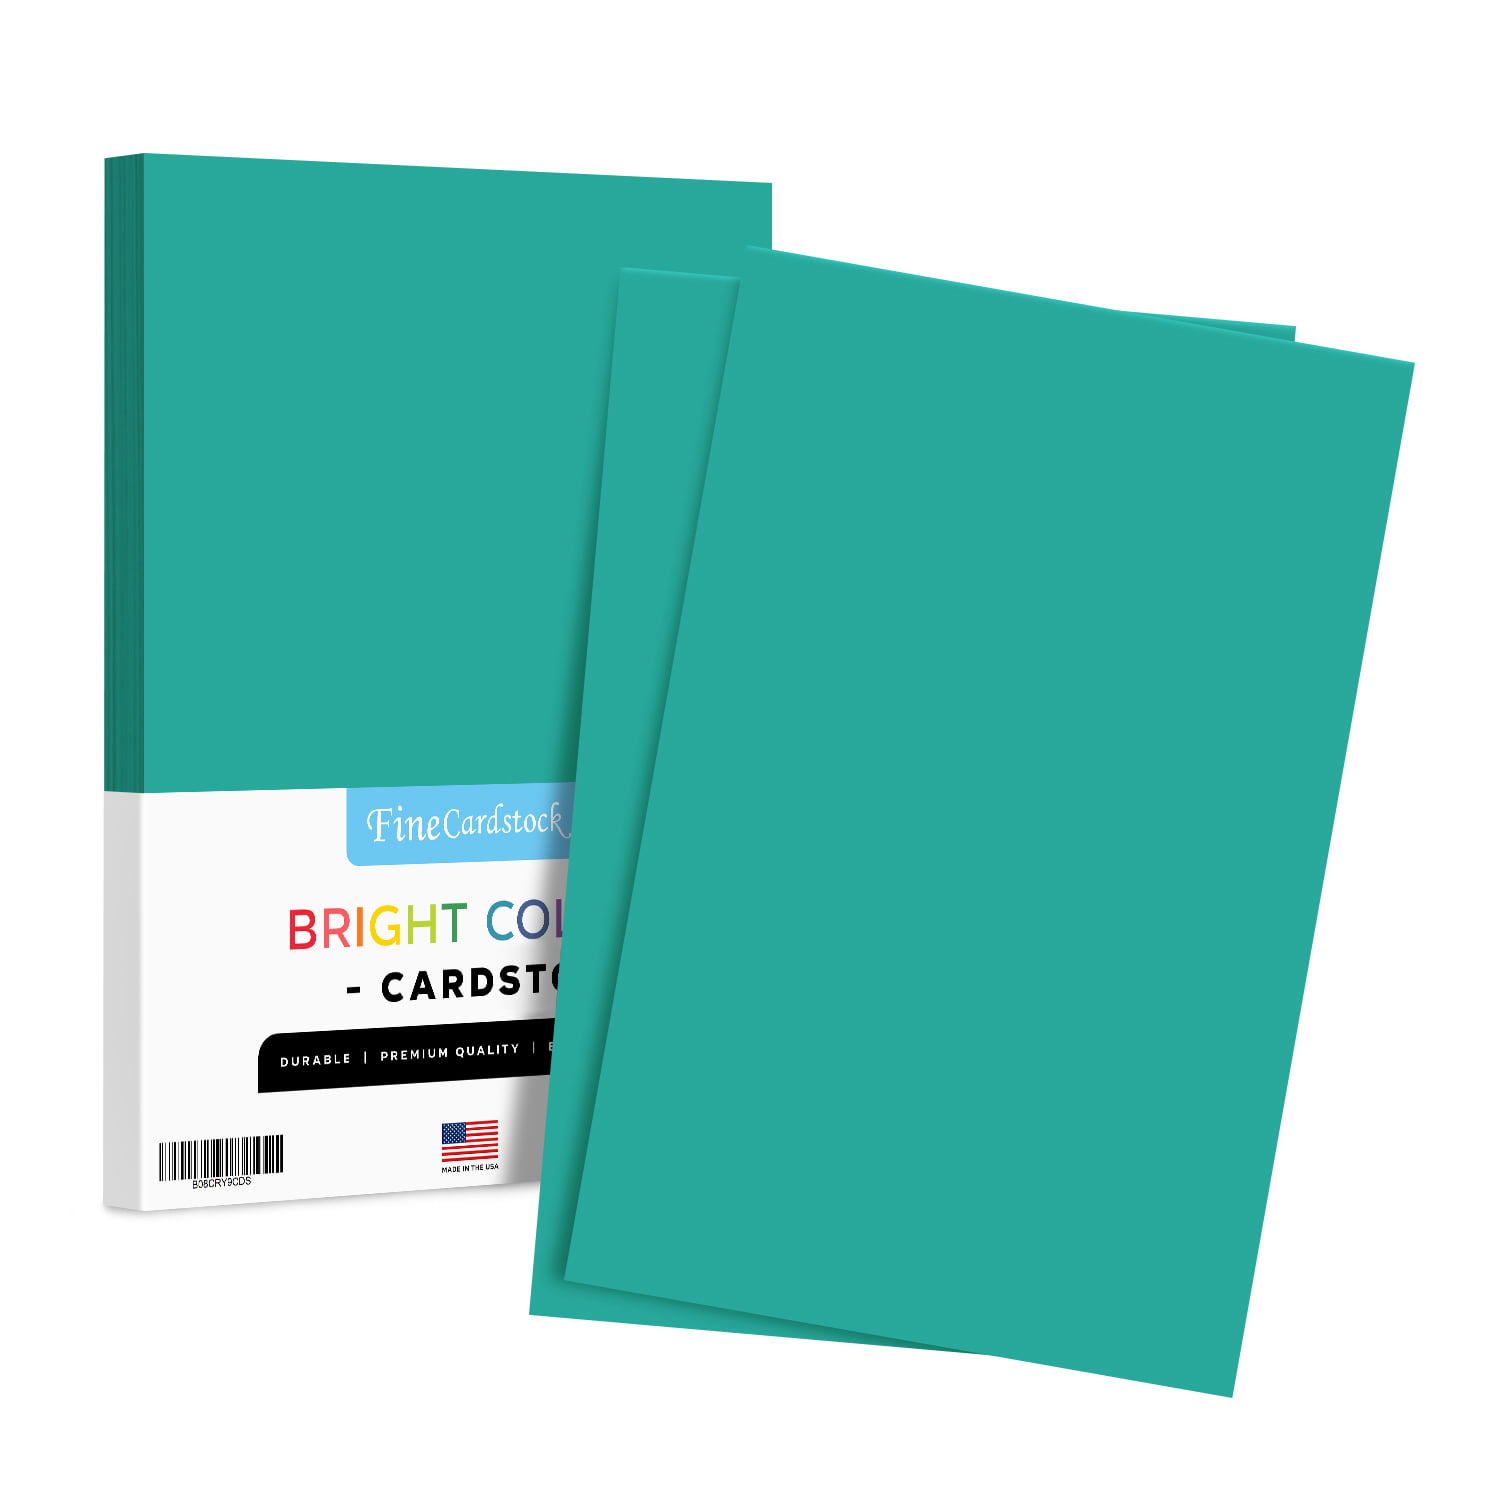 Free Delivery. Cover Cardstock Paper Premium Quality 8.5"x11" 65lb 